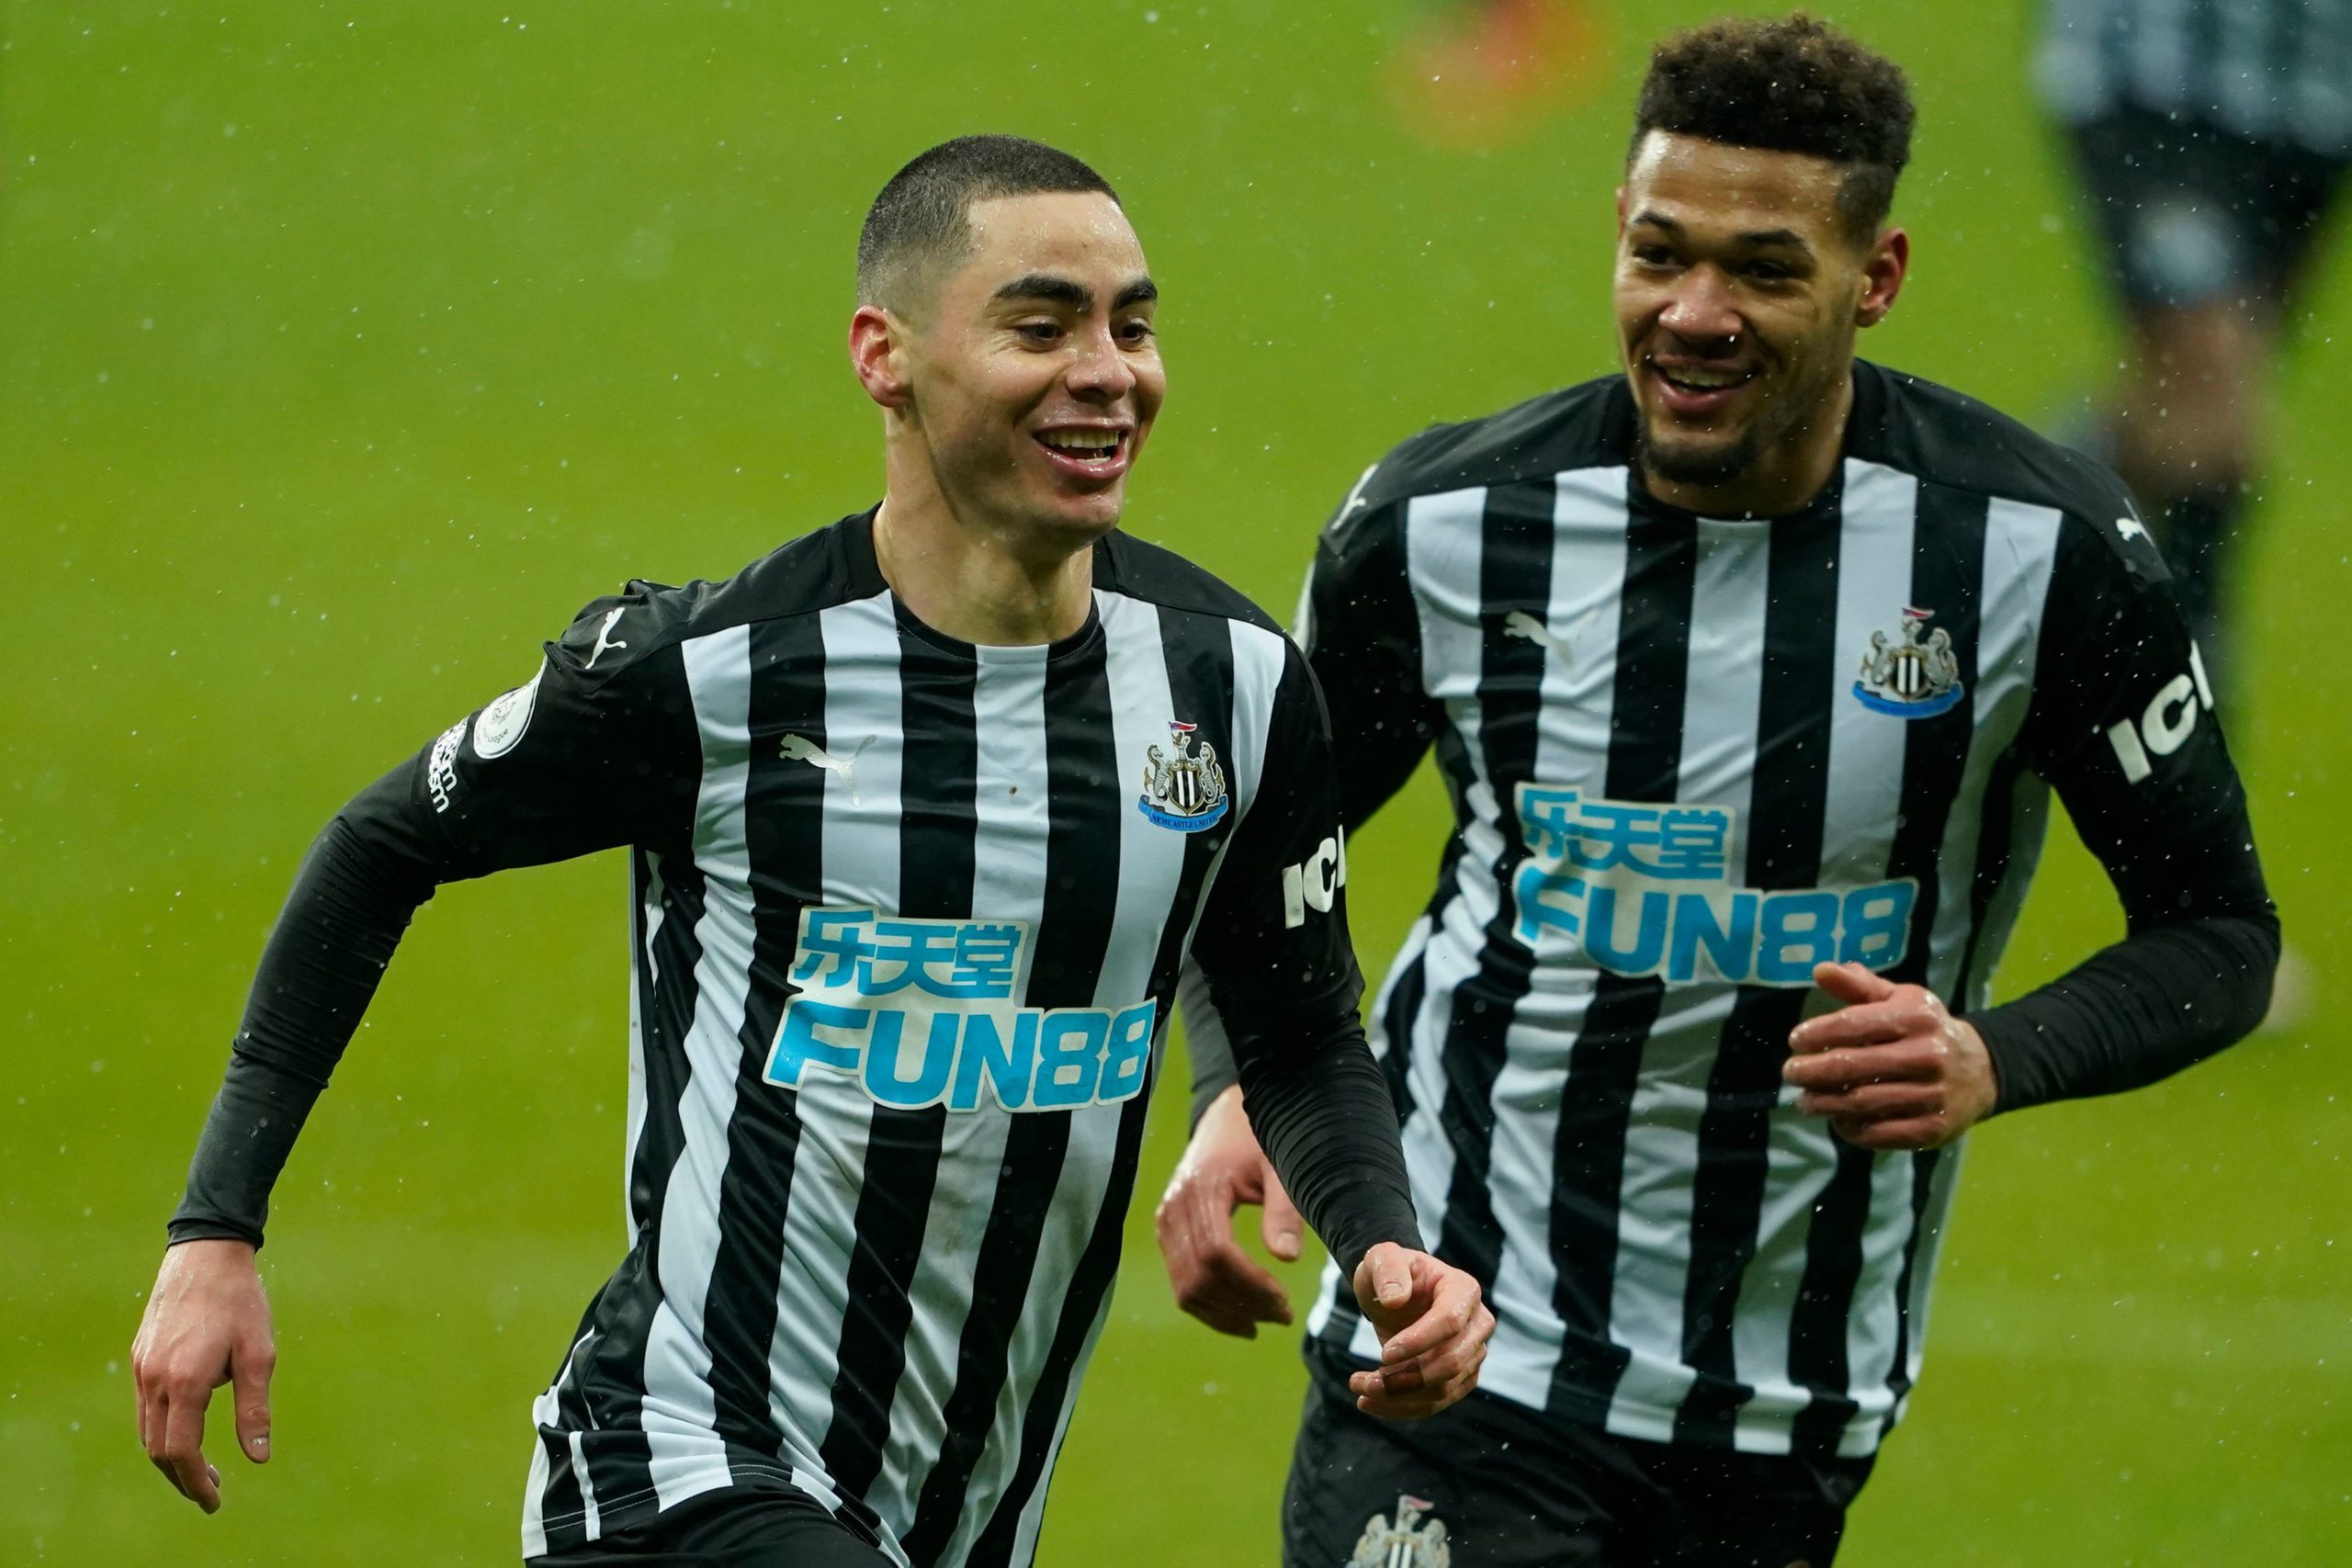 Newcastle's Almiron expected to stay beyond this summer (Almiron is seen in the photo)